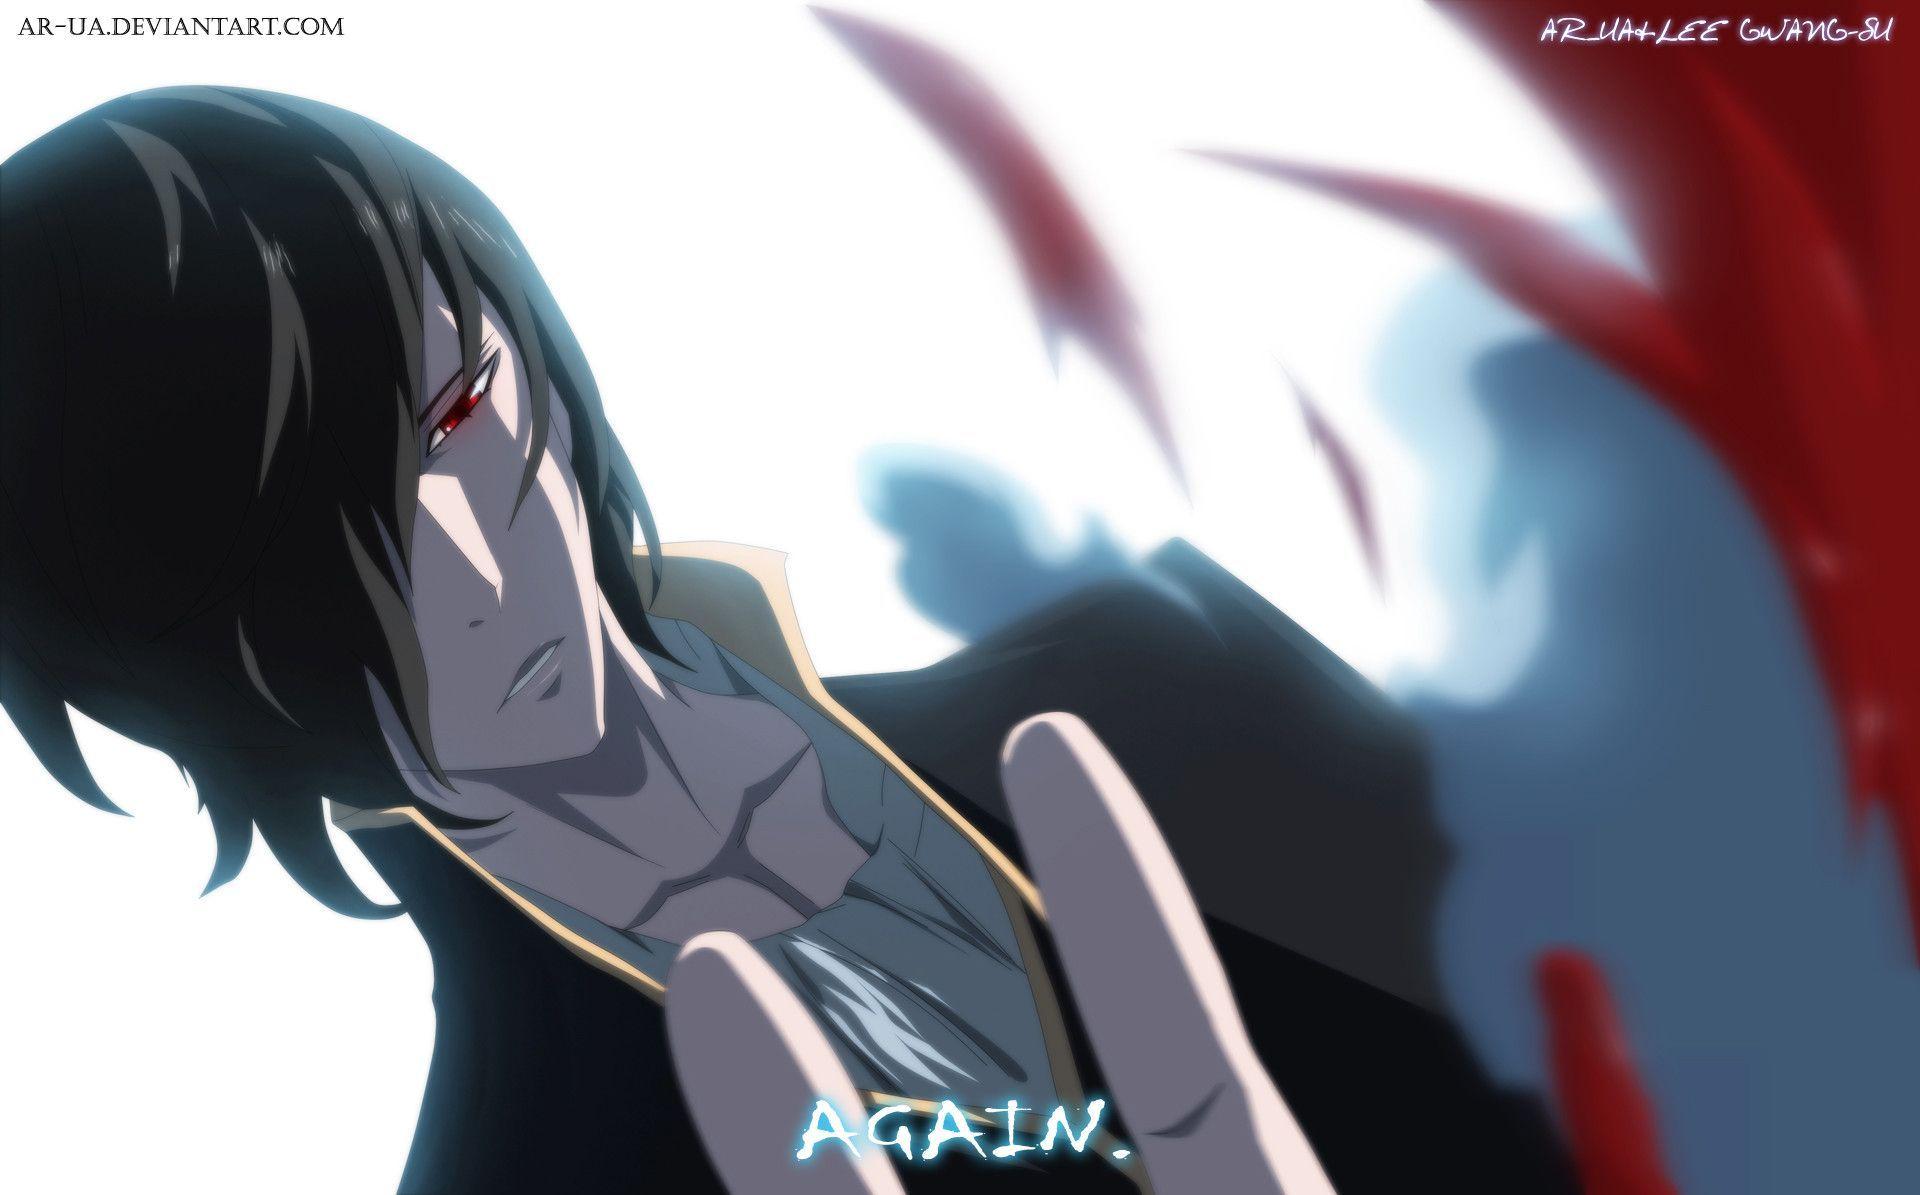 Noblesse: M 21 By AR UA